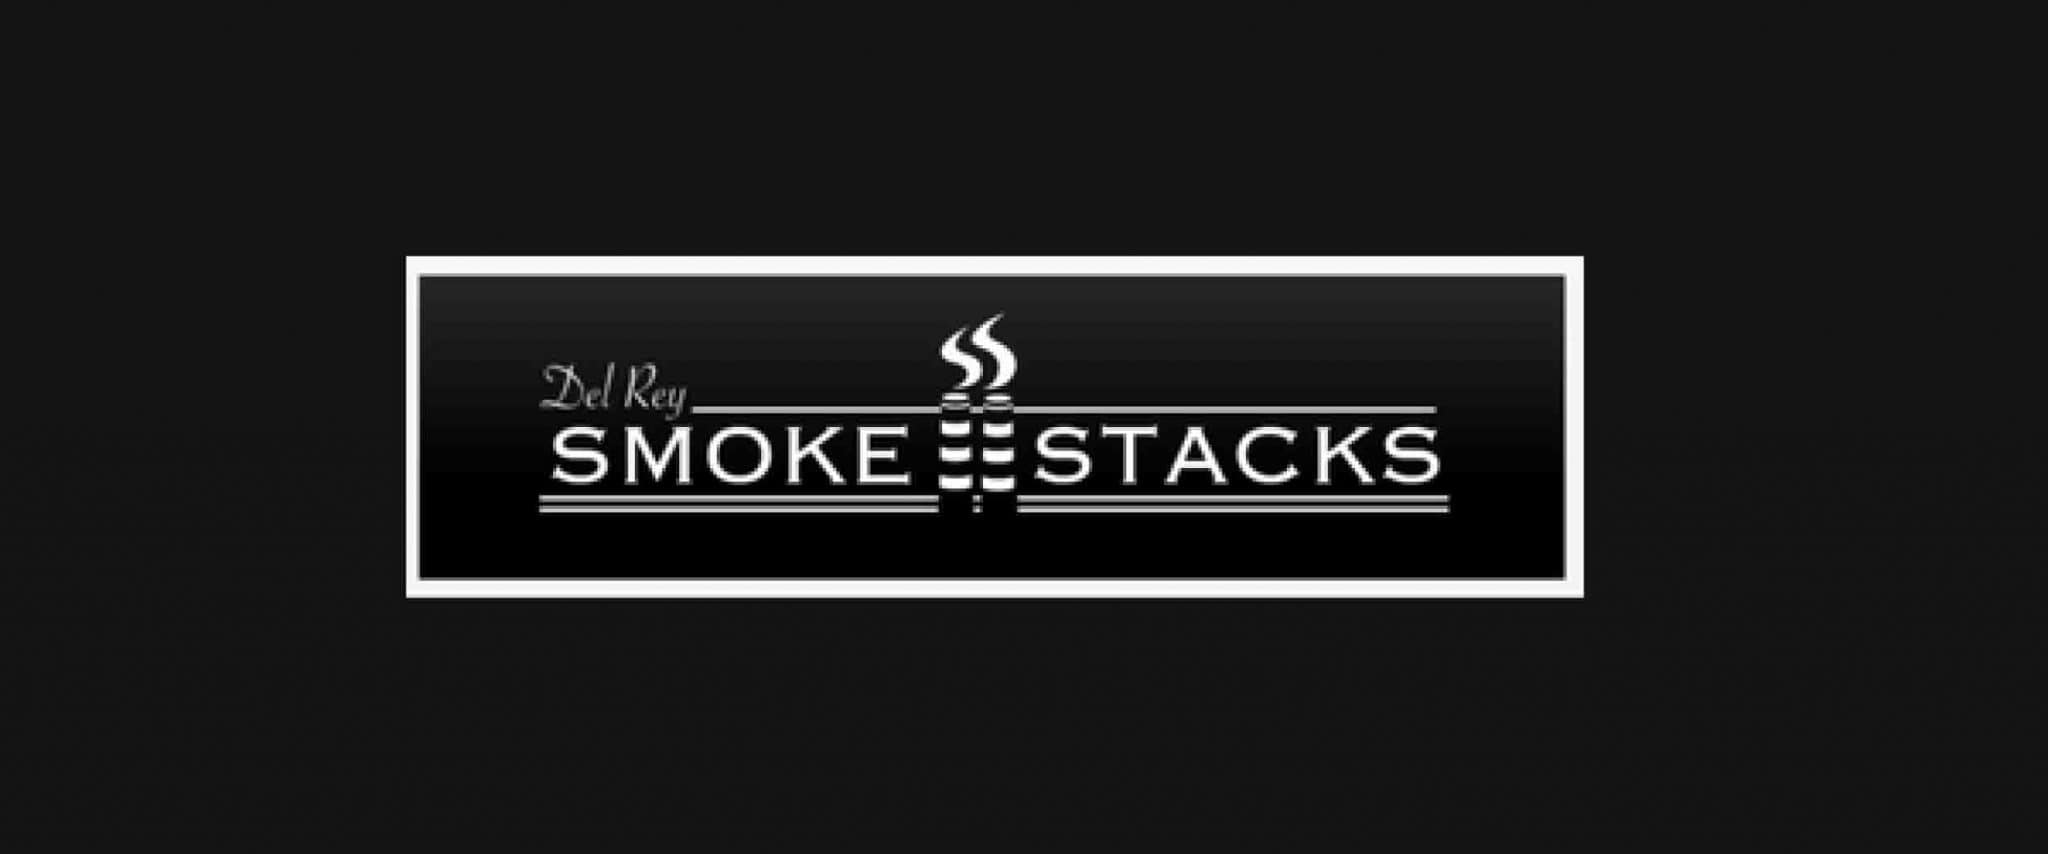 picture-of-Del-Rey-Smoke-Stacks